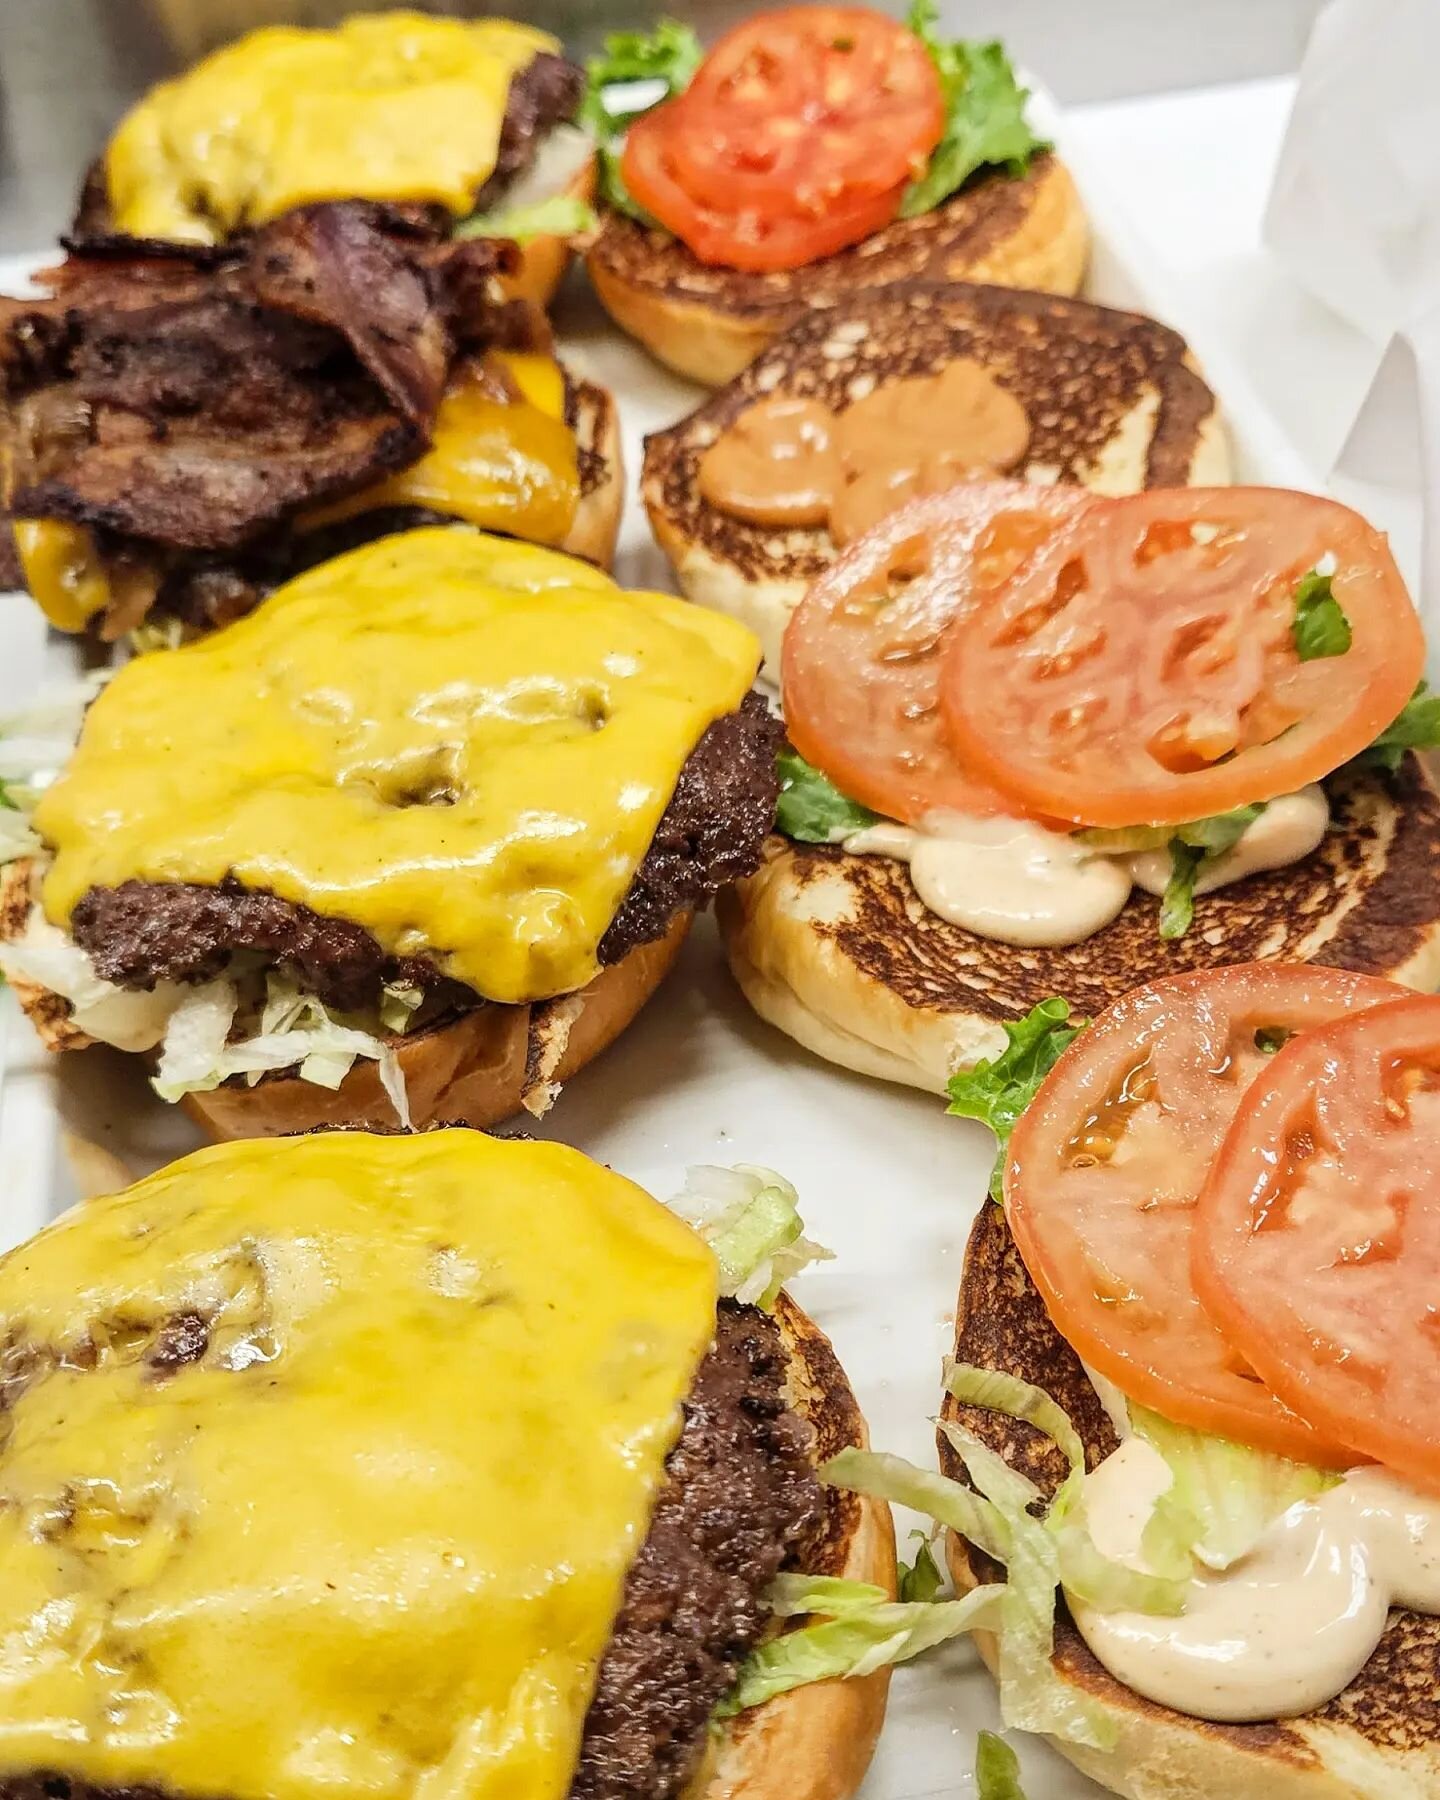 Just a burger beauty shot to remind you that we are open until 9pm every day.

🍔🍔🍔🍔

Interested in making these yummy burgers and want to grab a job with us before we staff up for summer?

Be sure to apply online in 5 minutes at chubbiesburgers.c